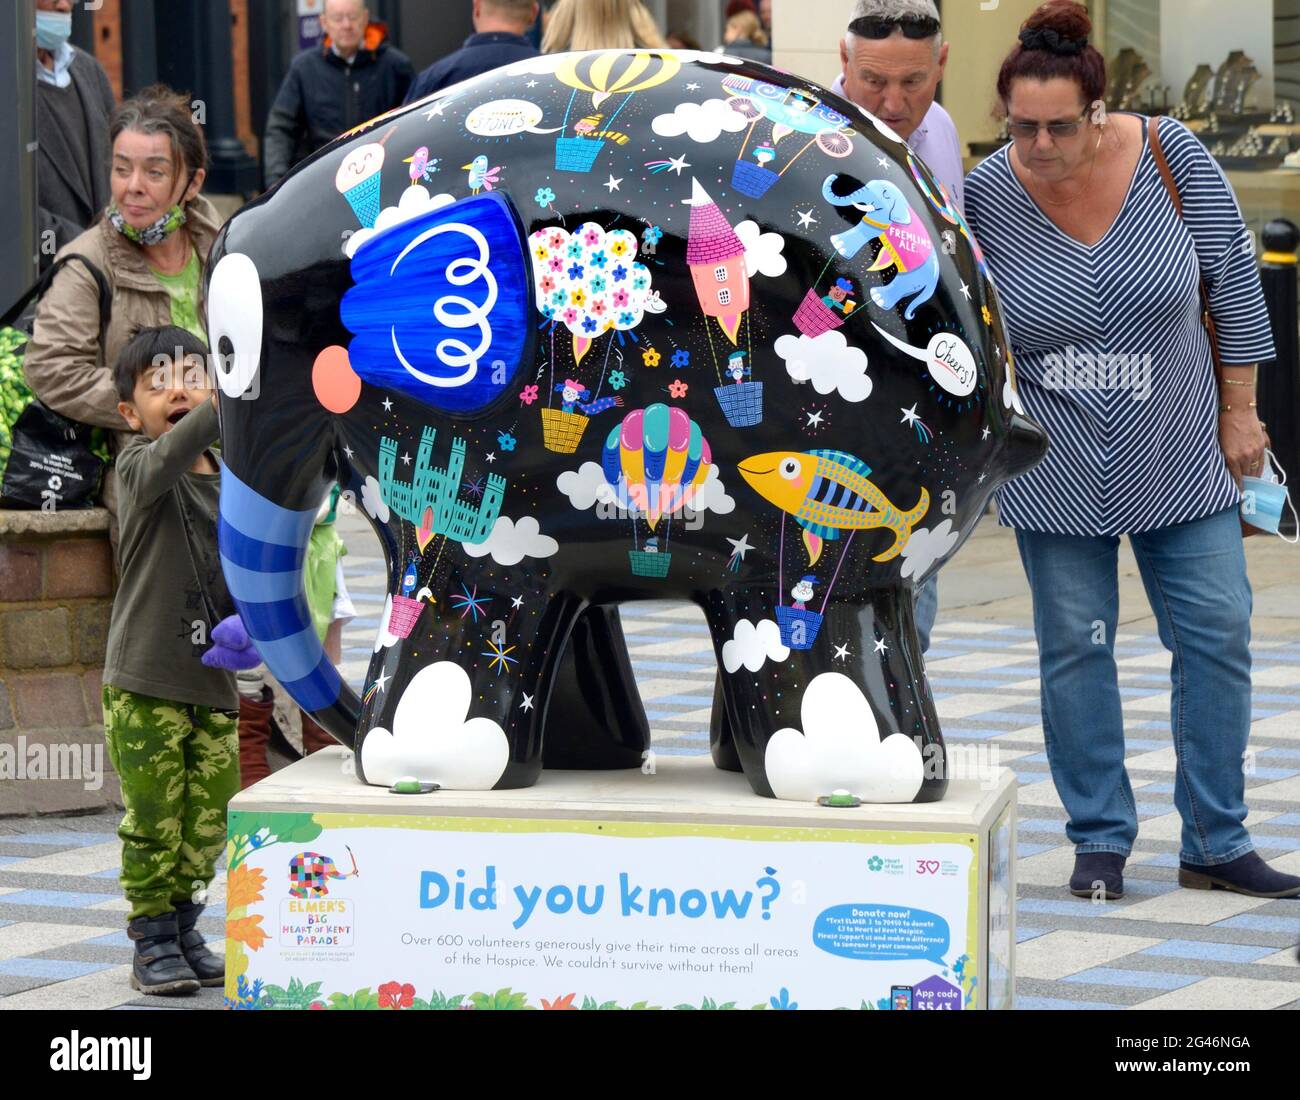 Maidstone, Kent, UK. 19th June, 2021. A huge herd of 81 colourful Elmers - based on David McKee's children's book character - appeard overnight in Maidstone, Kent, at the start of a 9 week parade in support of the Heart of Kent Hospice. The Elmers have been designed by well-known and unknown artists and will be auctioned off on August 9th September to raise funds for the Hospice. 'Never Forget' Credit: Phil Robinson/Alamy Live News Stock Photo